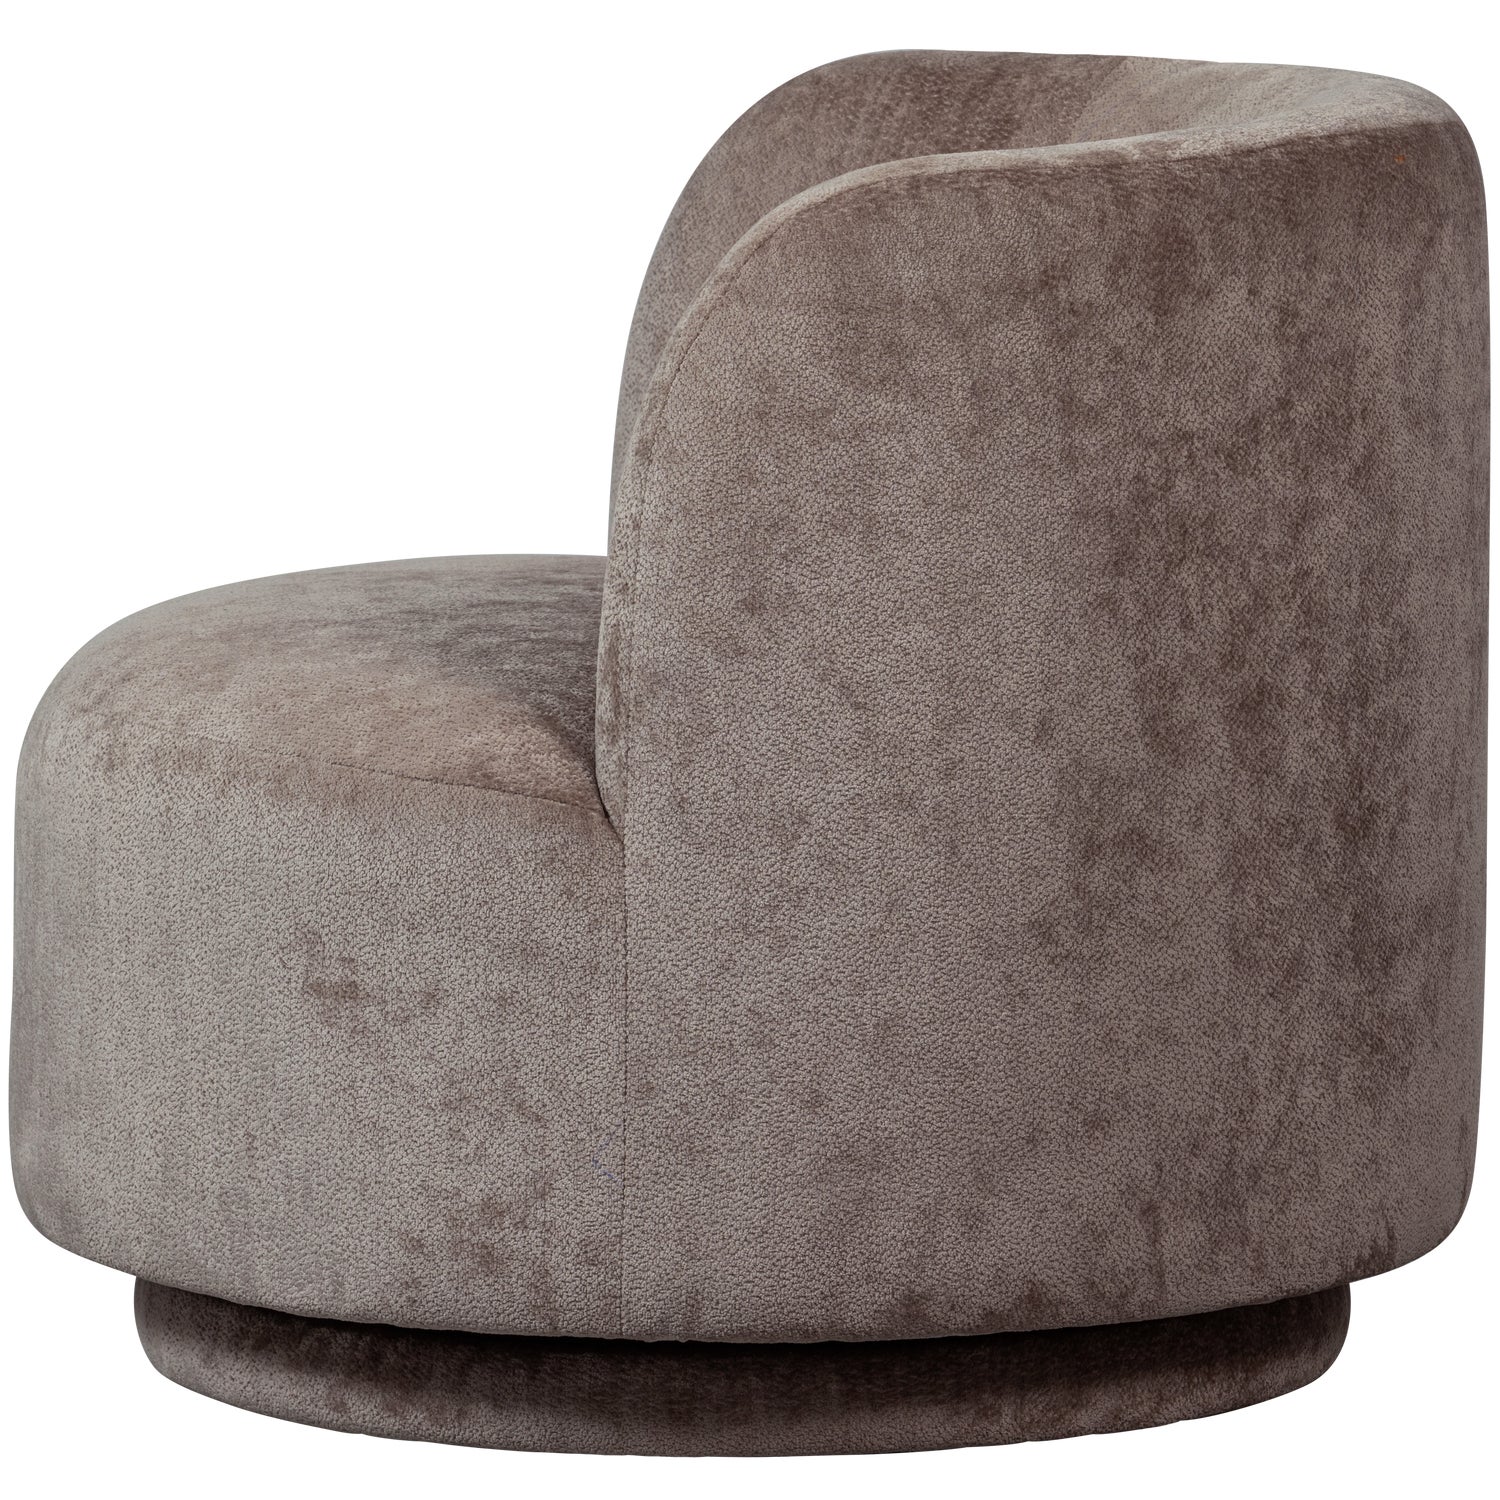 801440-T-03_VS_BP_Popular_fauteuil_taupe.png?auto=webp&format=png&width=1500&height=1500